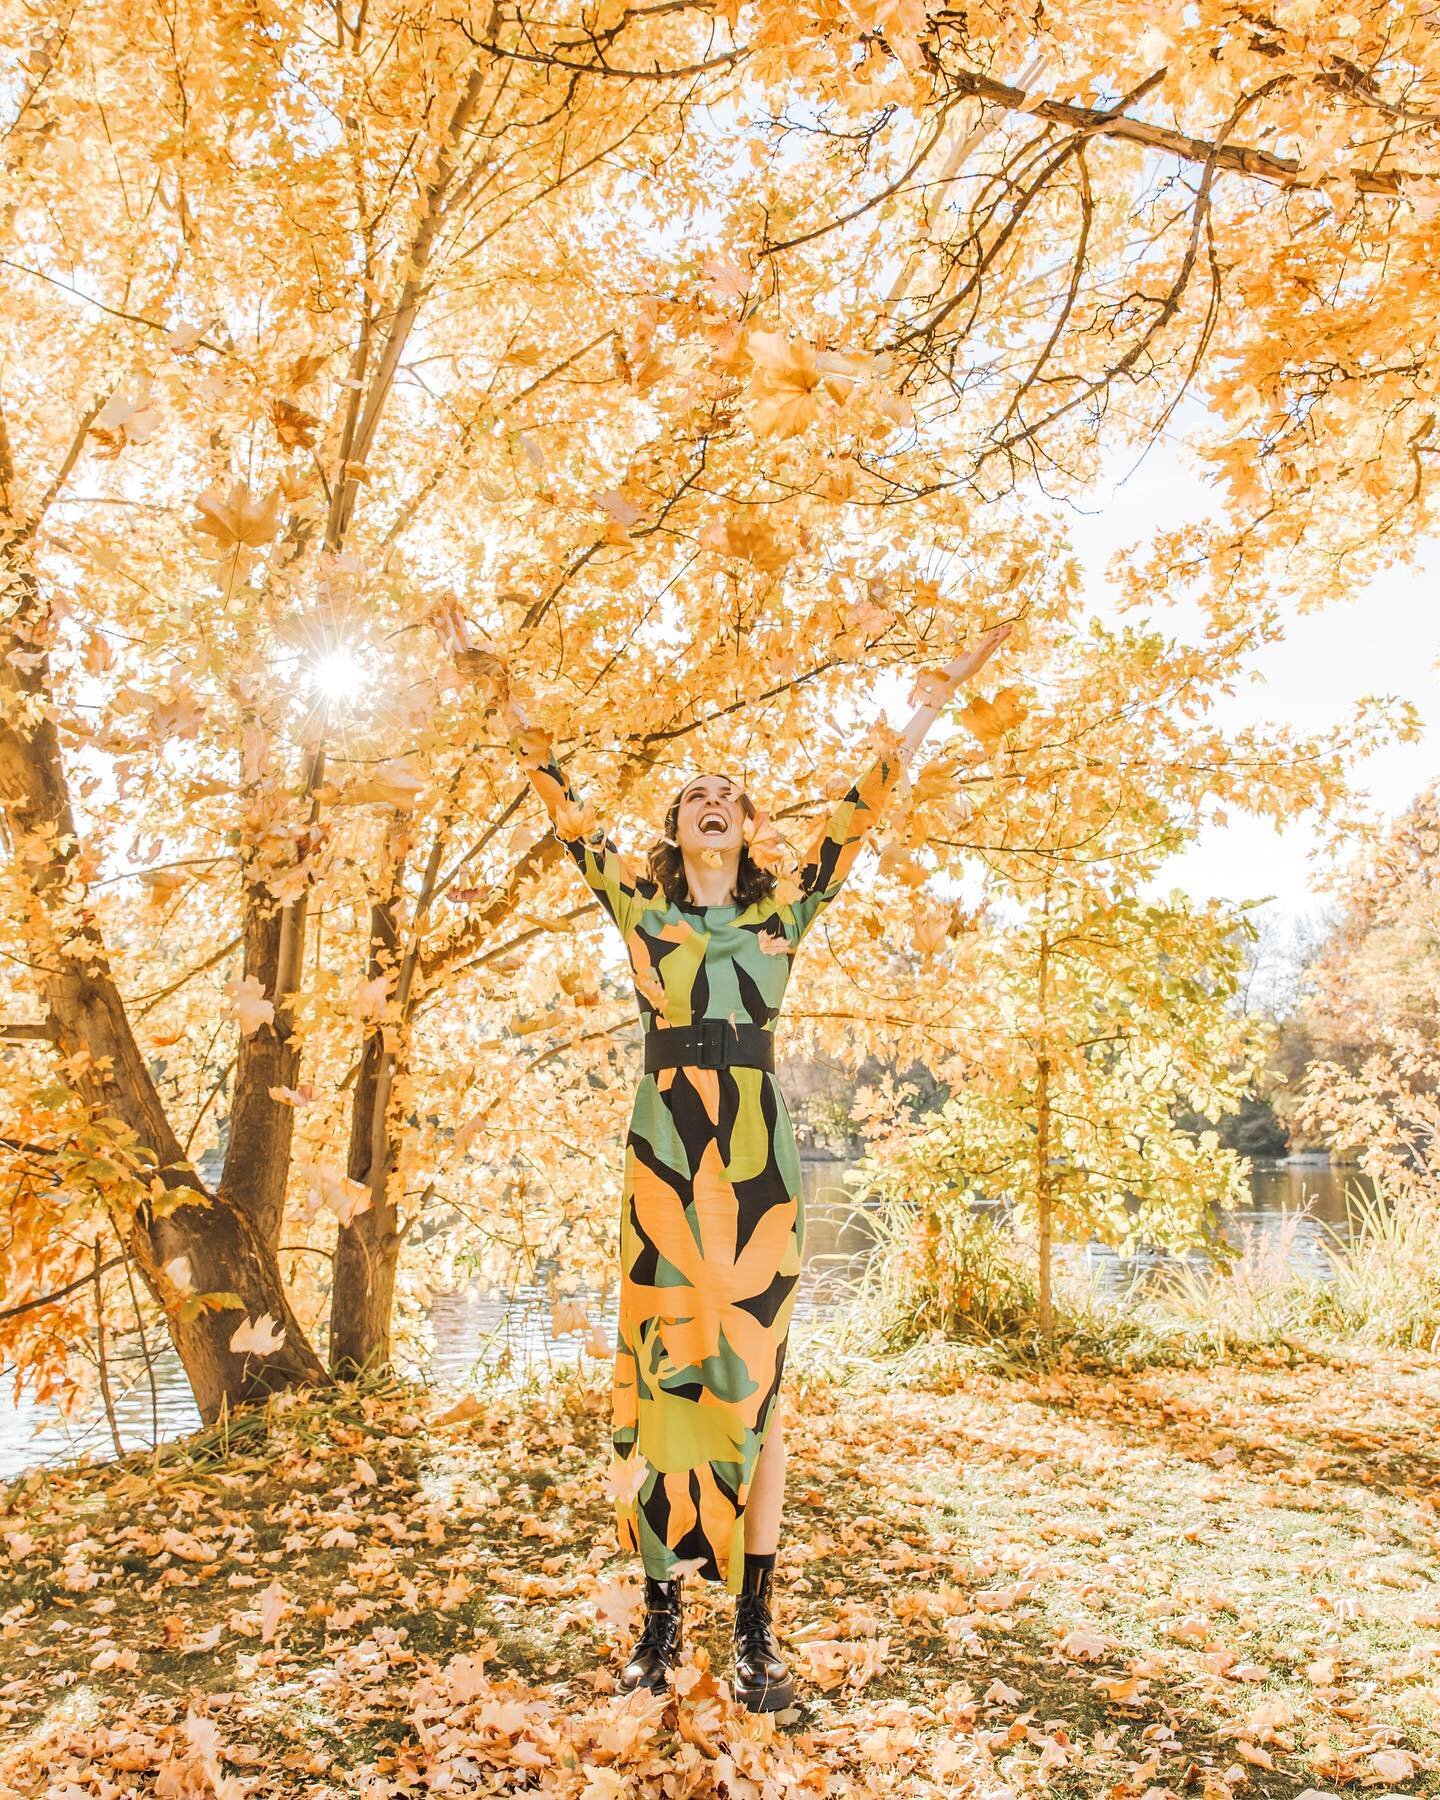 ''' Went full basic for the first photo ' but worth it for this gorgeous @bl_nk_london dress!! Matched the Fall leaves in Idaho perfectly!! It was fun seeing all the colorful Fall leaves, since California is just brown right now ''&zwj;'''''